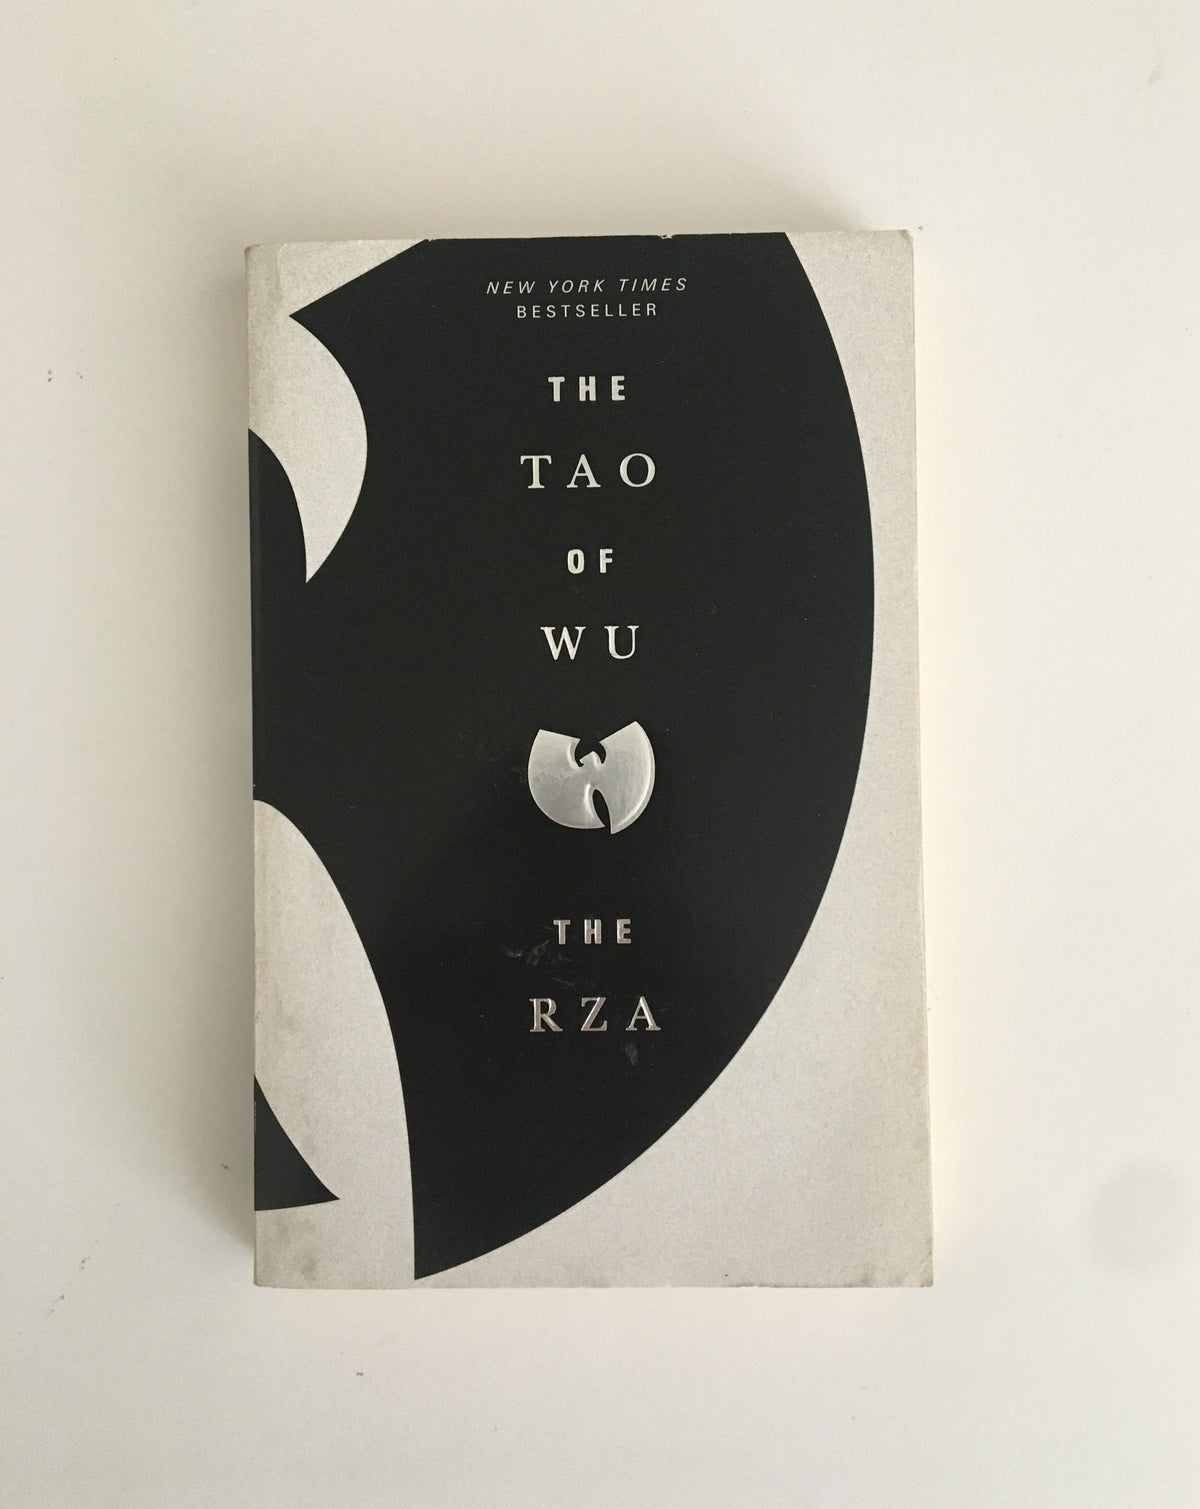 The Tao of WU by RZA